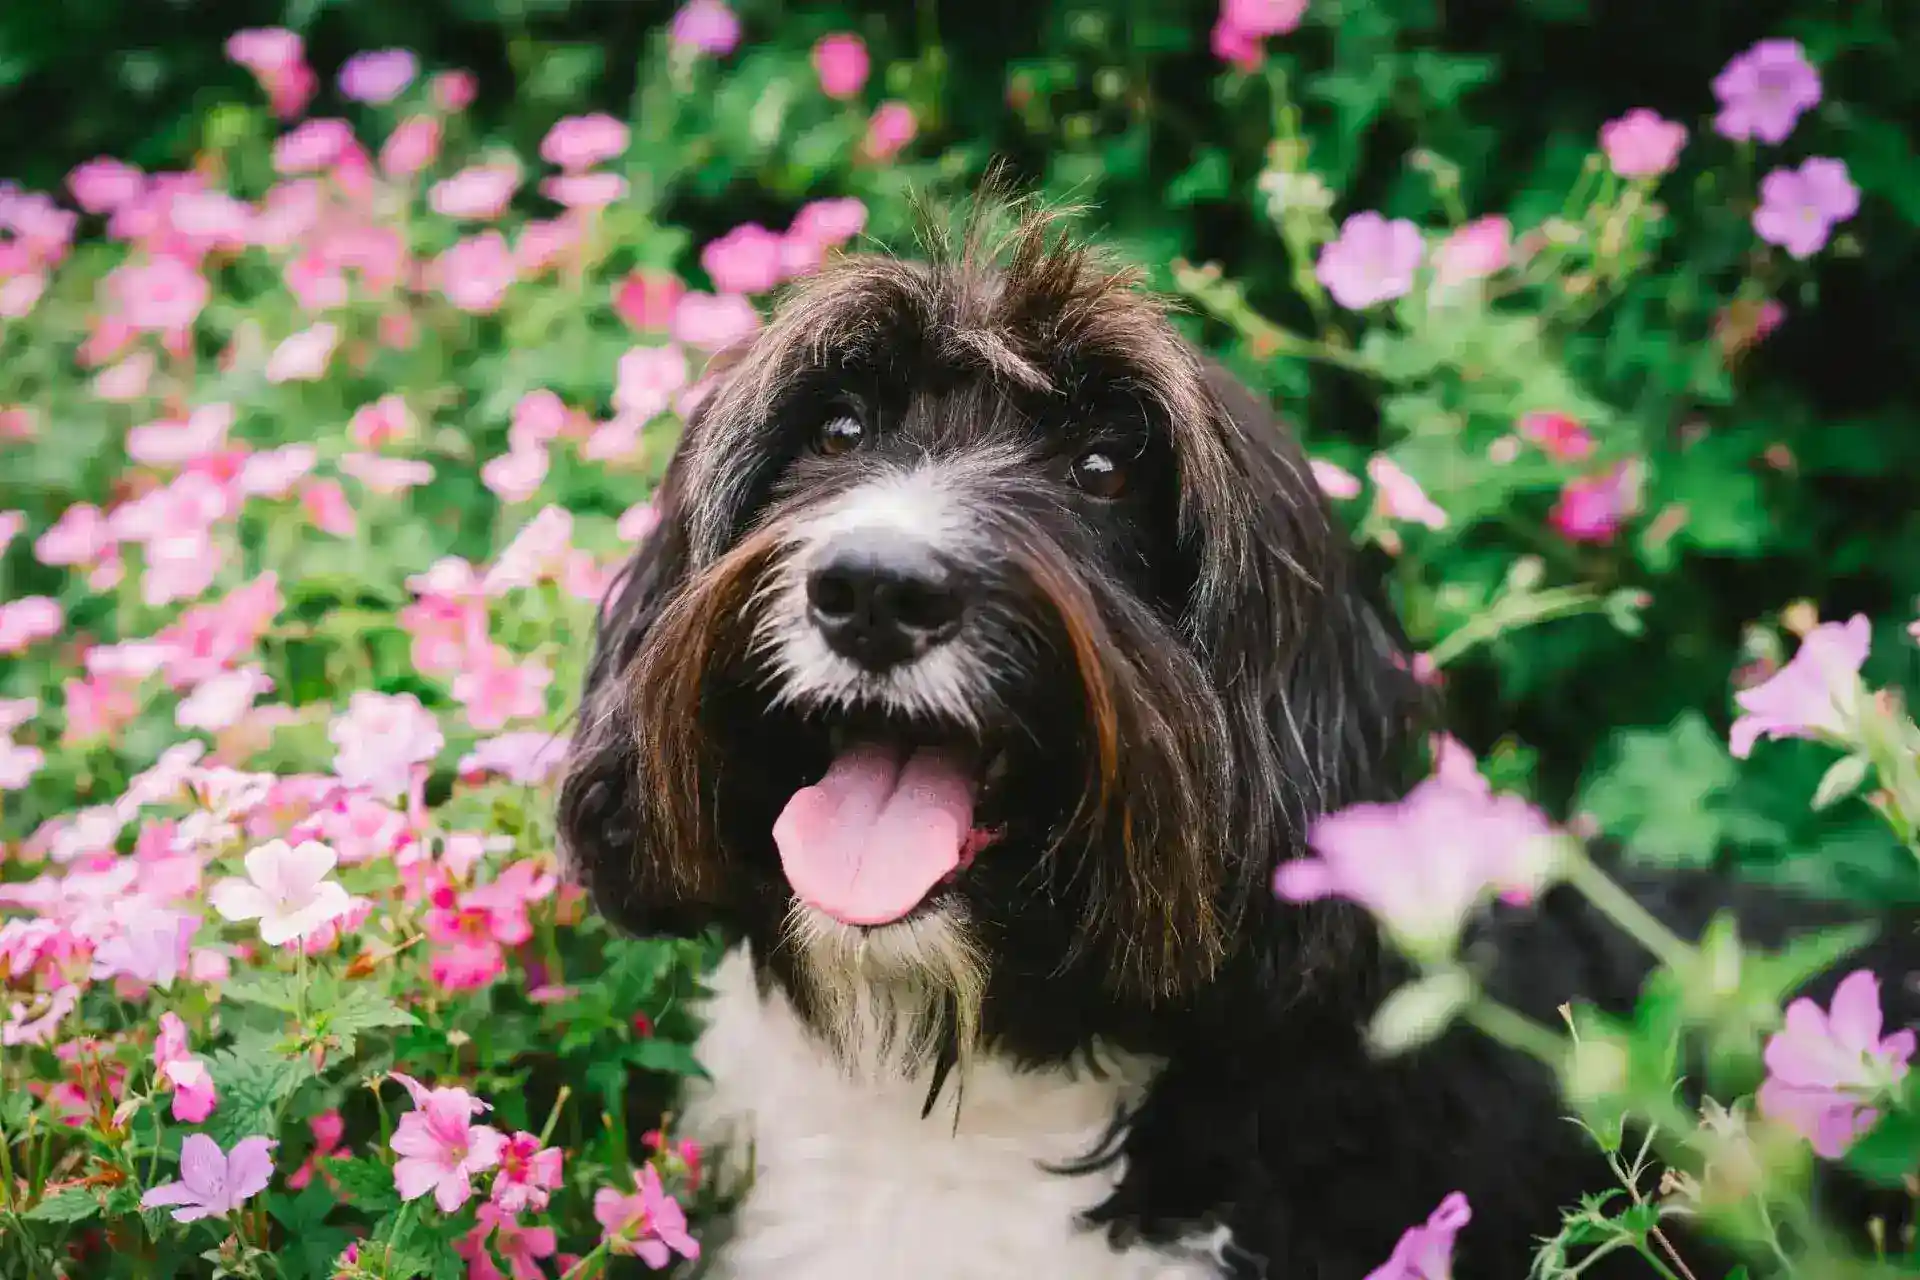 Dog in a field of pink flowers